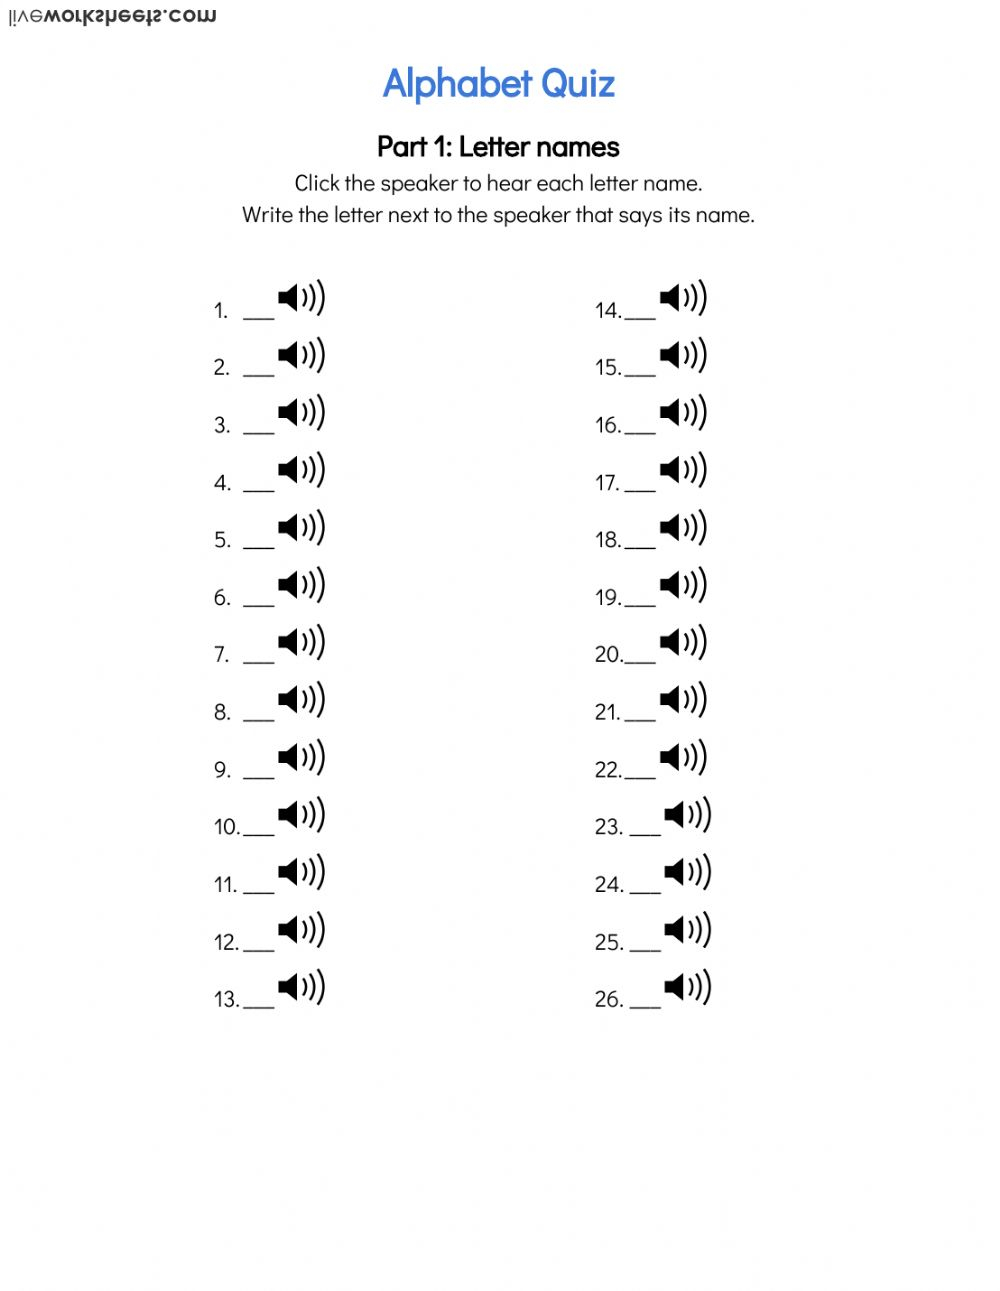 Alphabet Names And Sounds Quiz - Interactive Worksheet within Alphabet Exam Worksheets